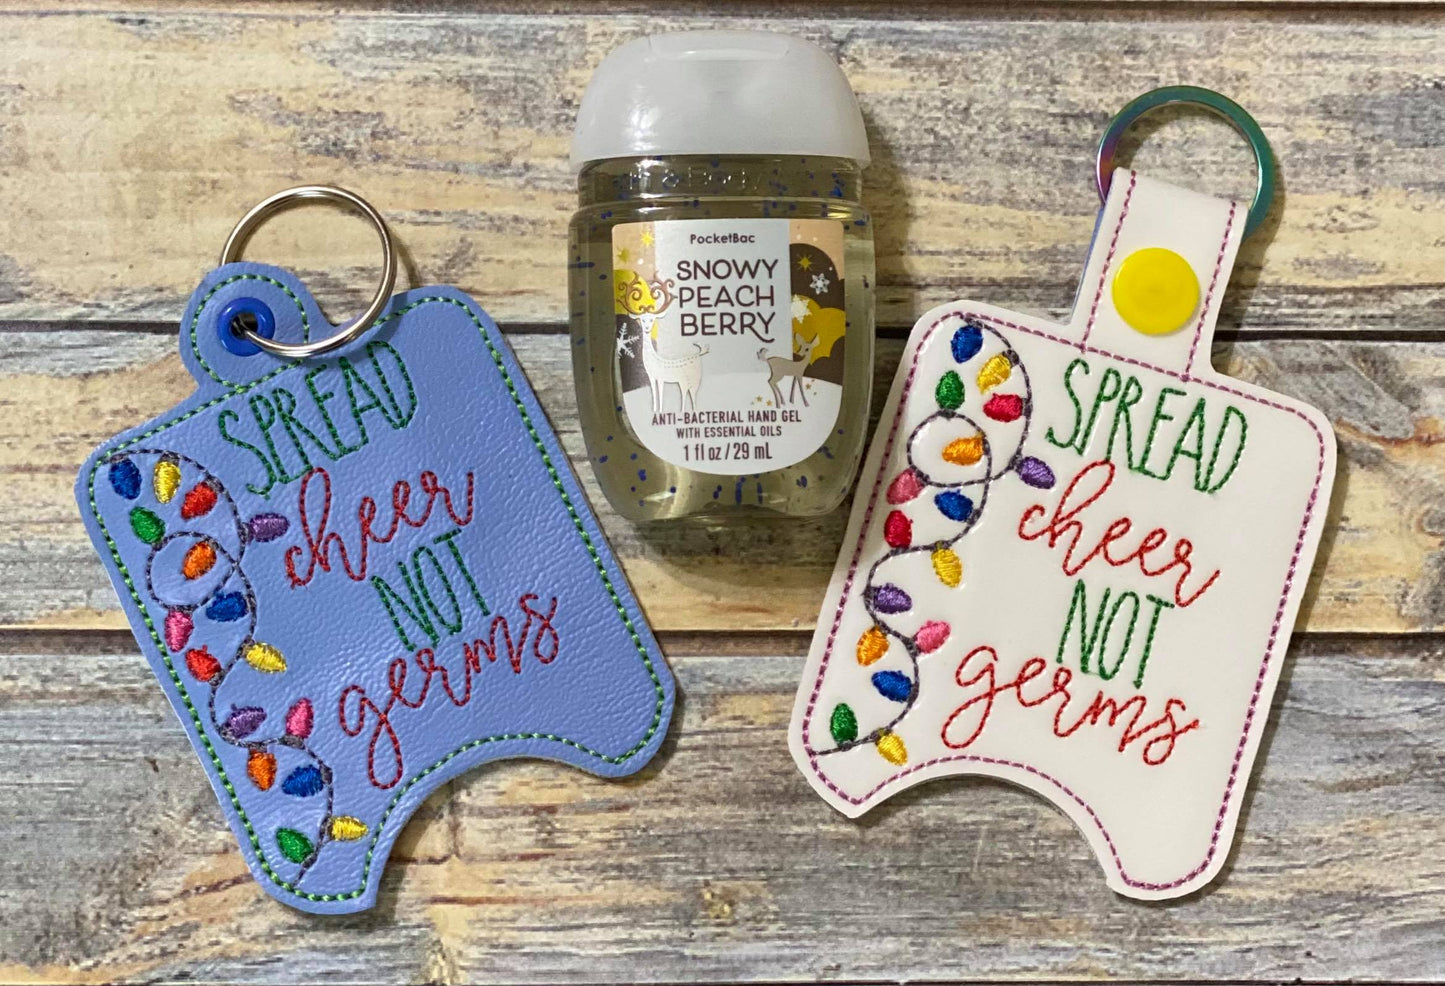 Spread Cheer Not Germs Sanitizer Holders - DIGITAL Embroidery DESIGN